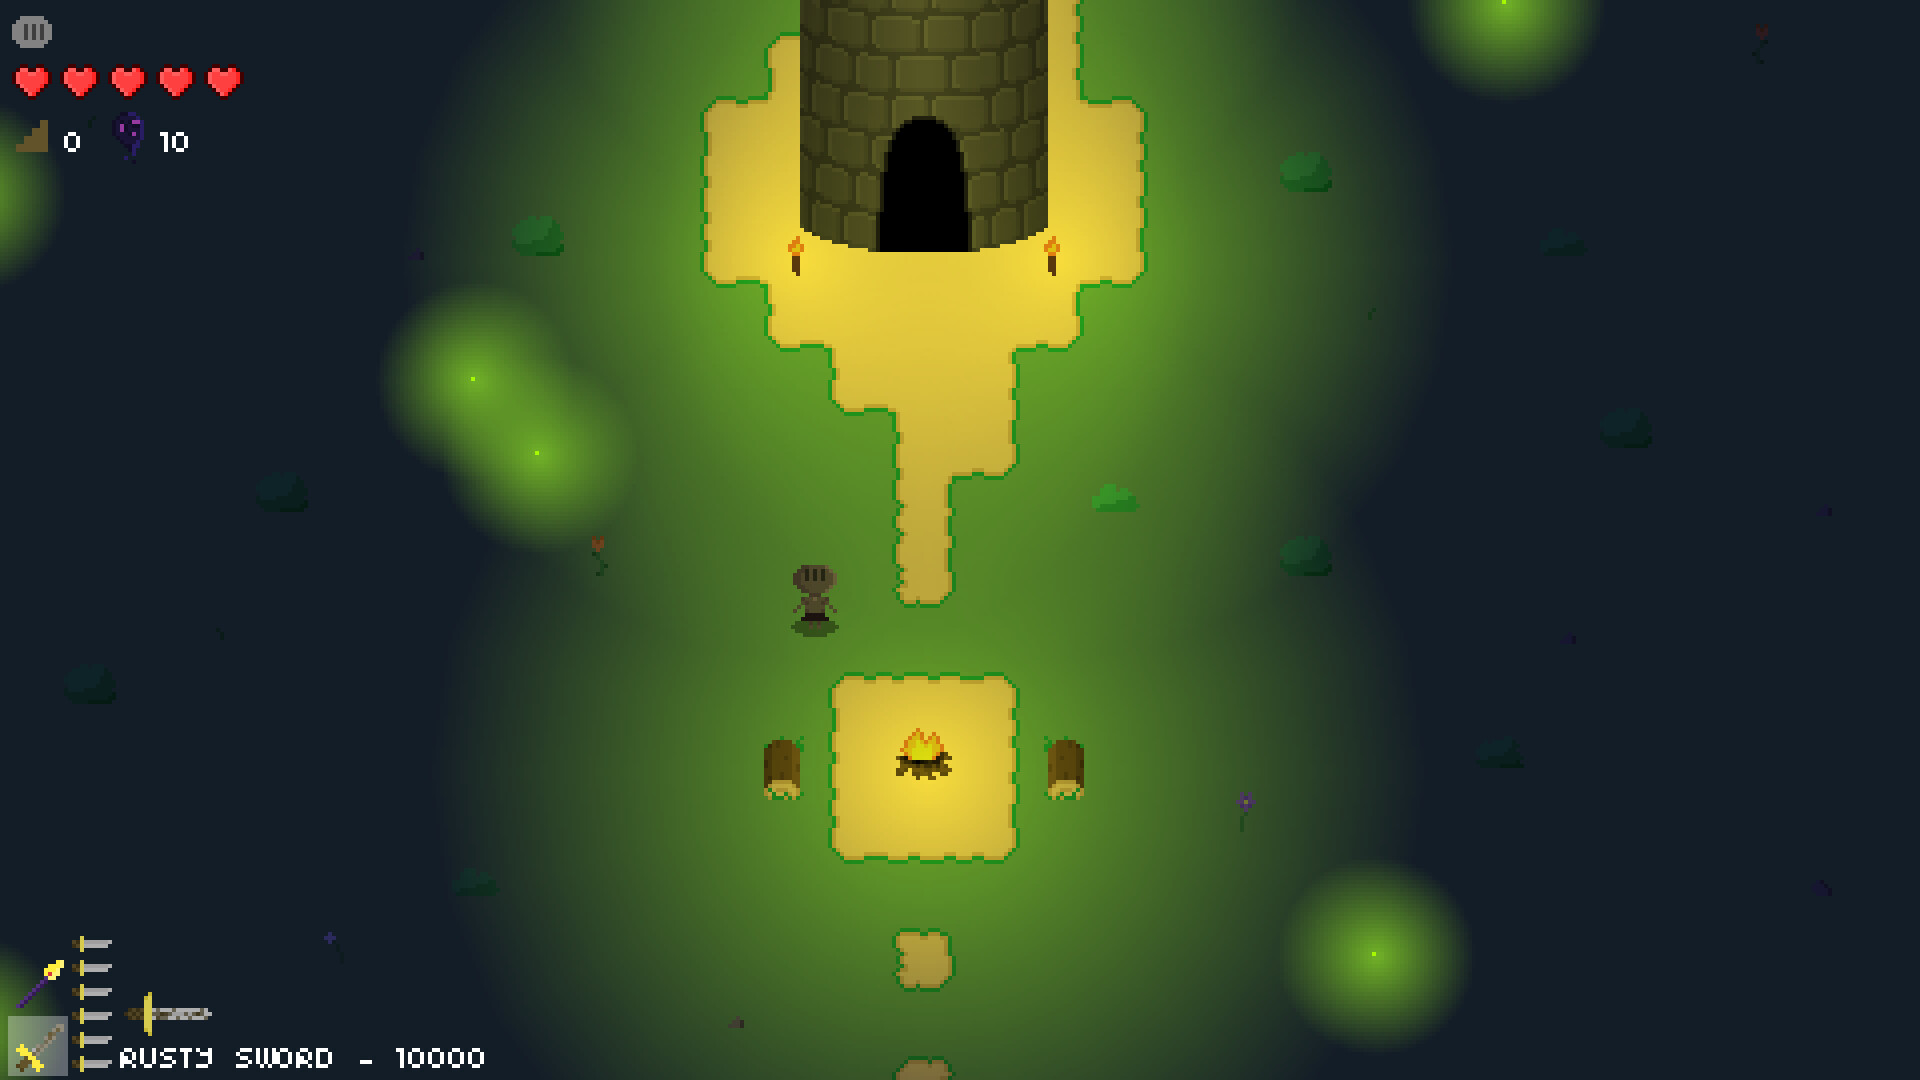 Topple The Tower Featured Screenshot #1